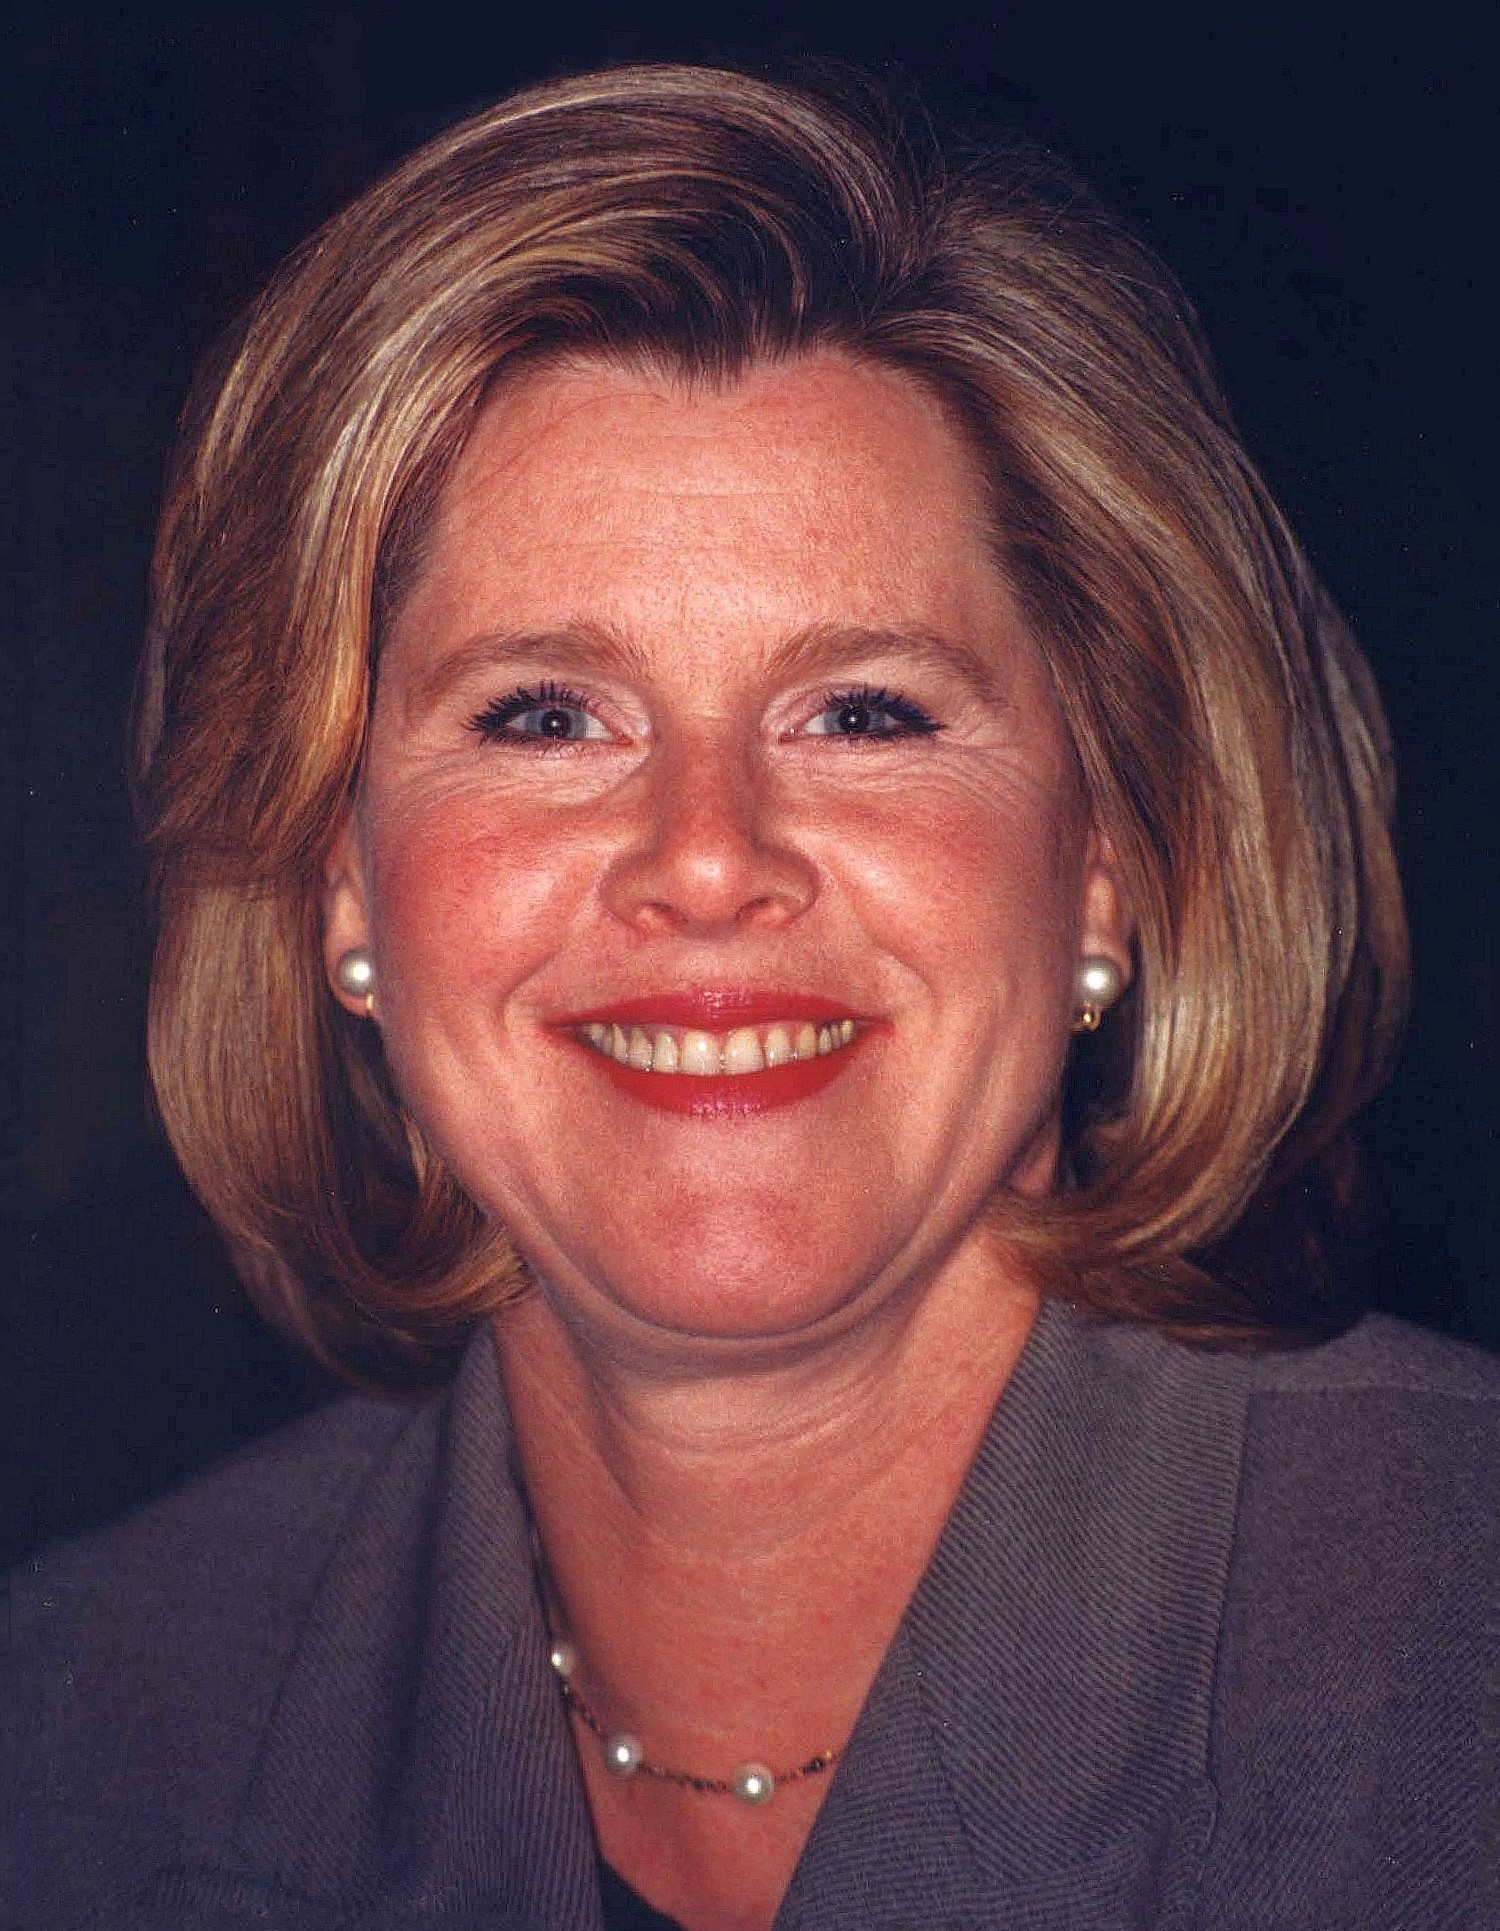 Image of Tipper Gore from Wikidata